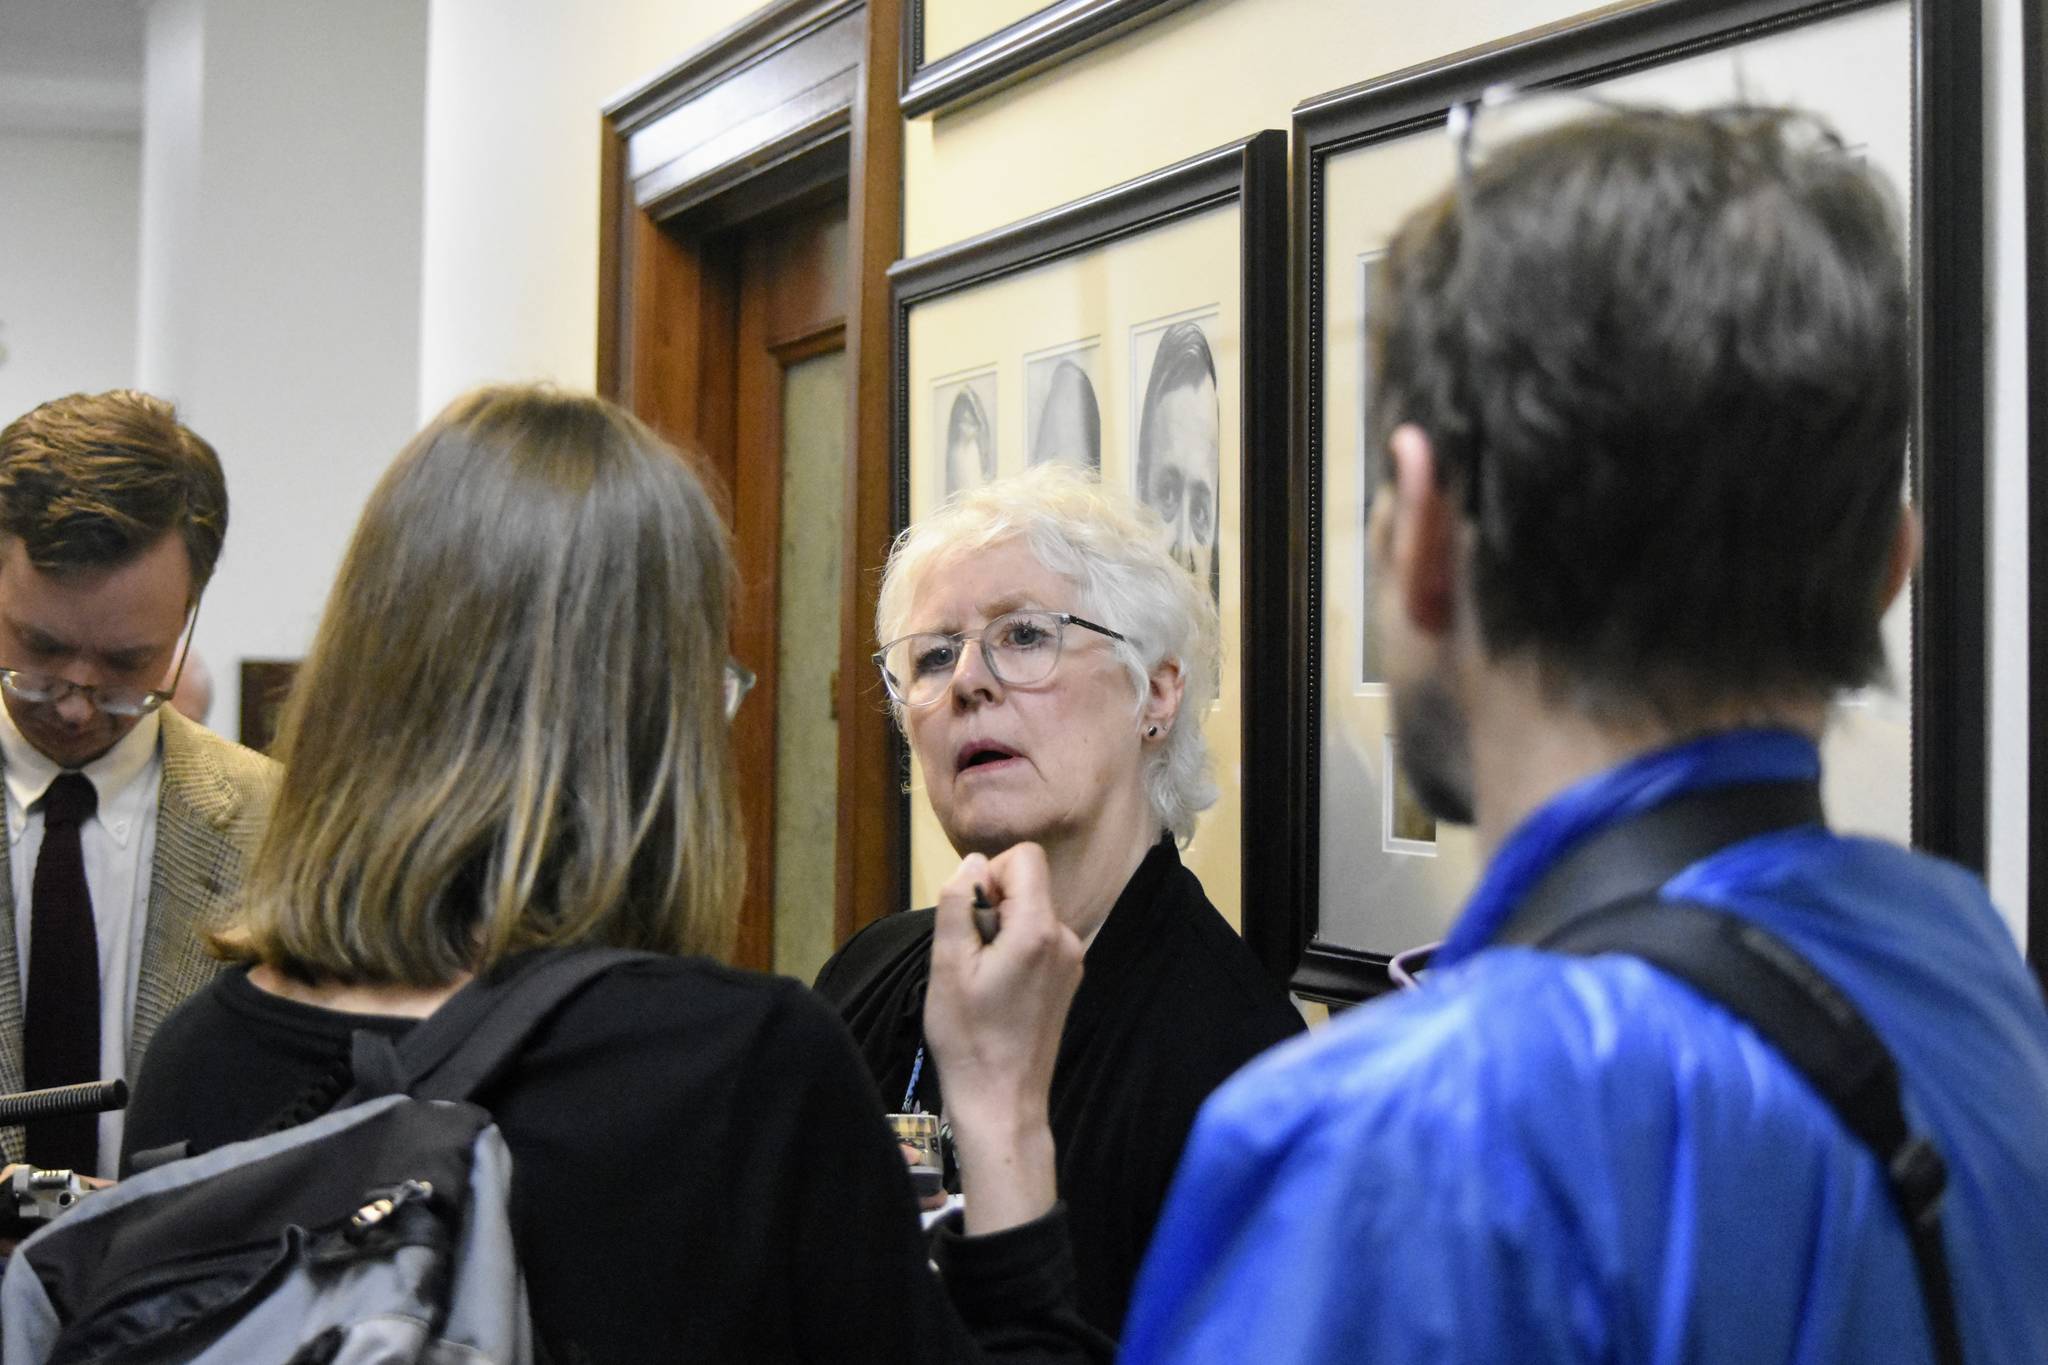 House Speaker Louise Stutes, R-Kodiak, told reporters on Friday, June 25, 2021, she was optimistic a deal with the House Minority caucus would be reached by Monday. Both Stutes and Minority Leader Cathy Tilton, R-Wasilla, declined to give details on the deal. (Peter Segall / Juneau Empire)